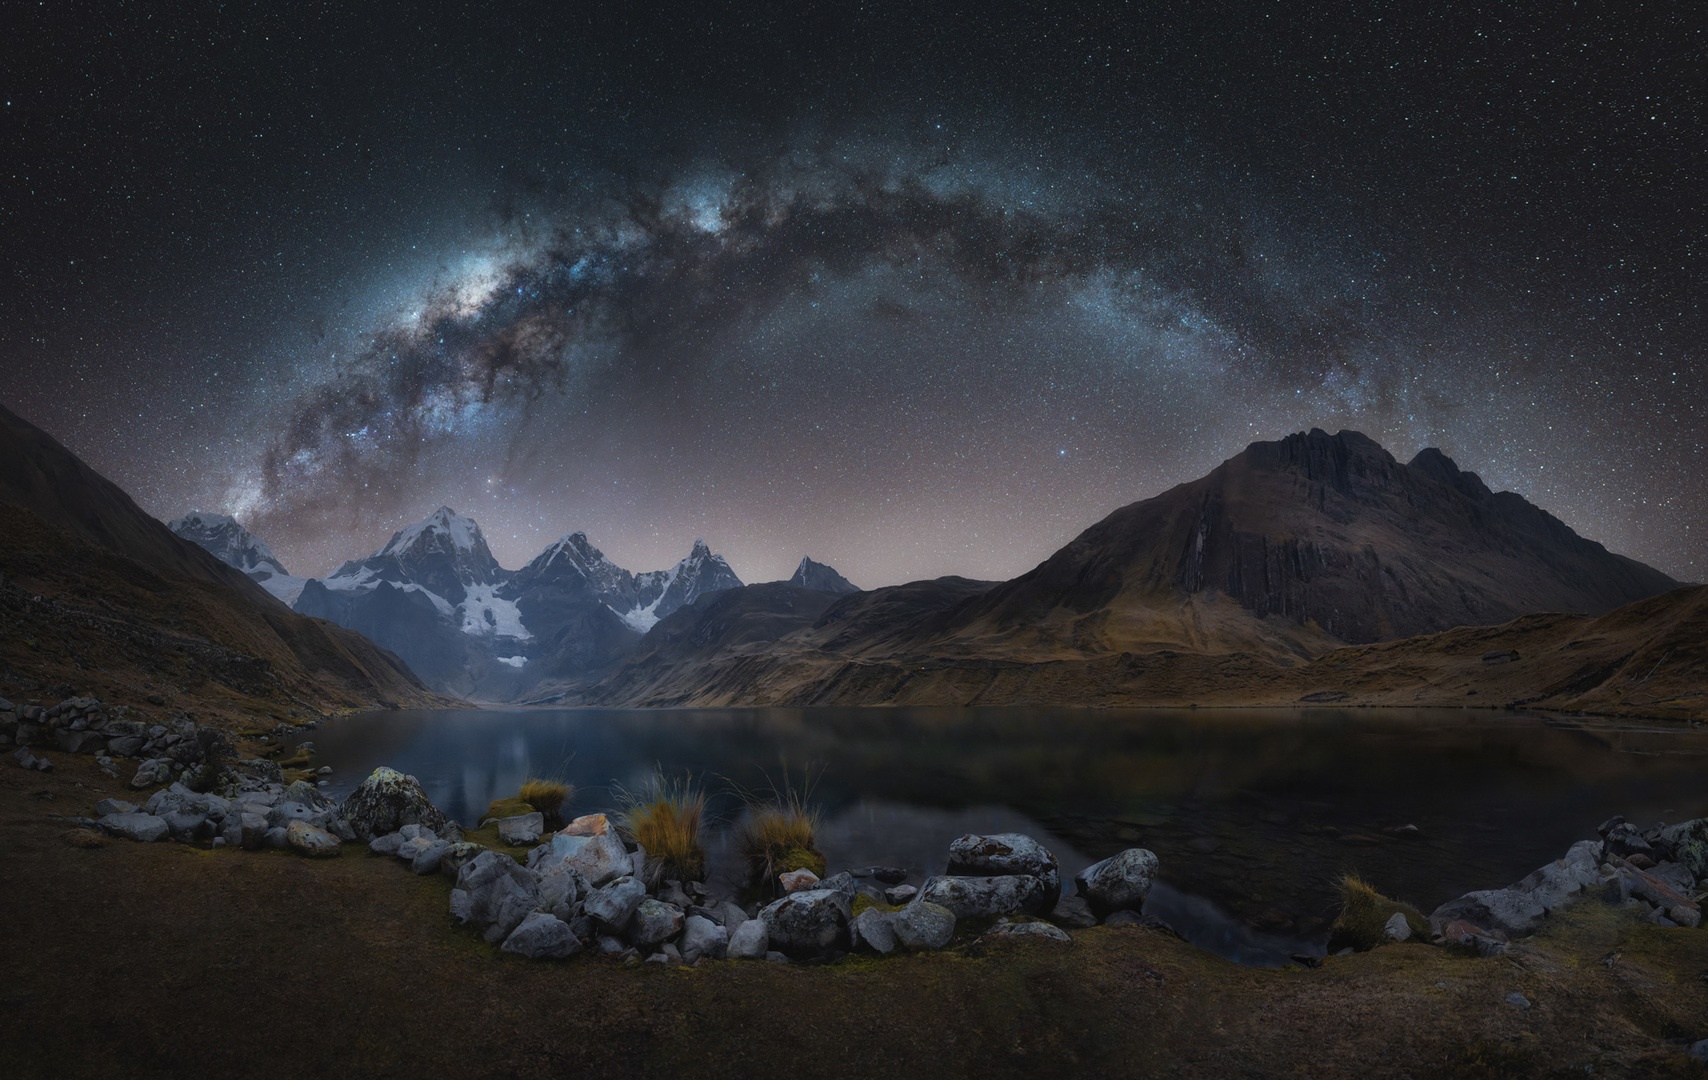 Milky Way arc covering the sky over Huayhuash in Peru